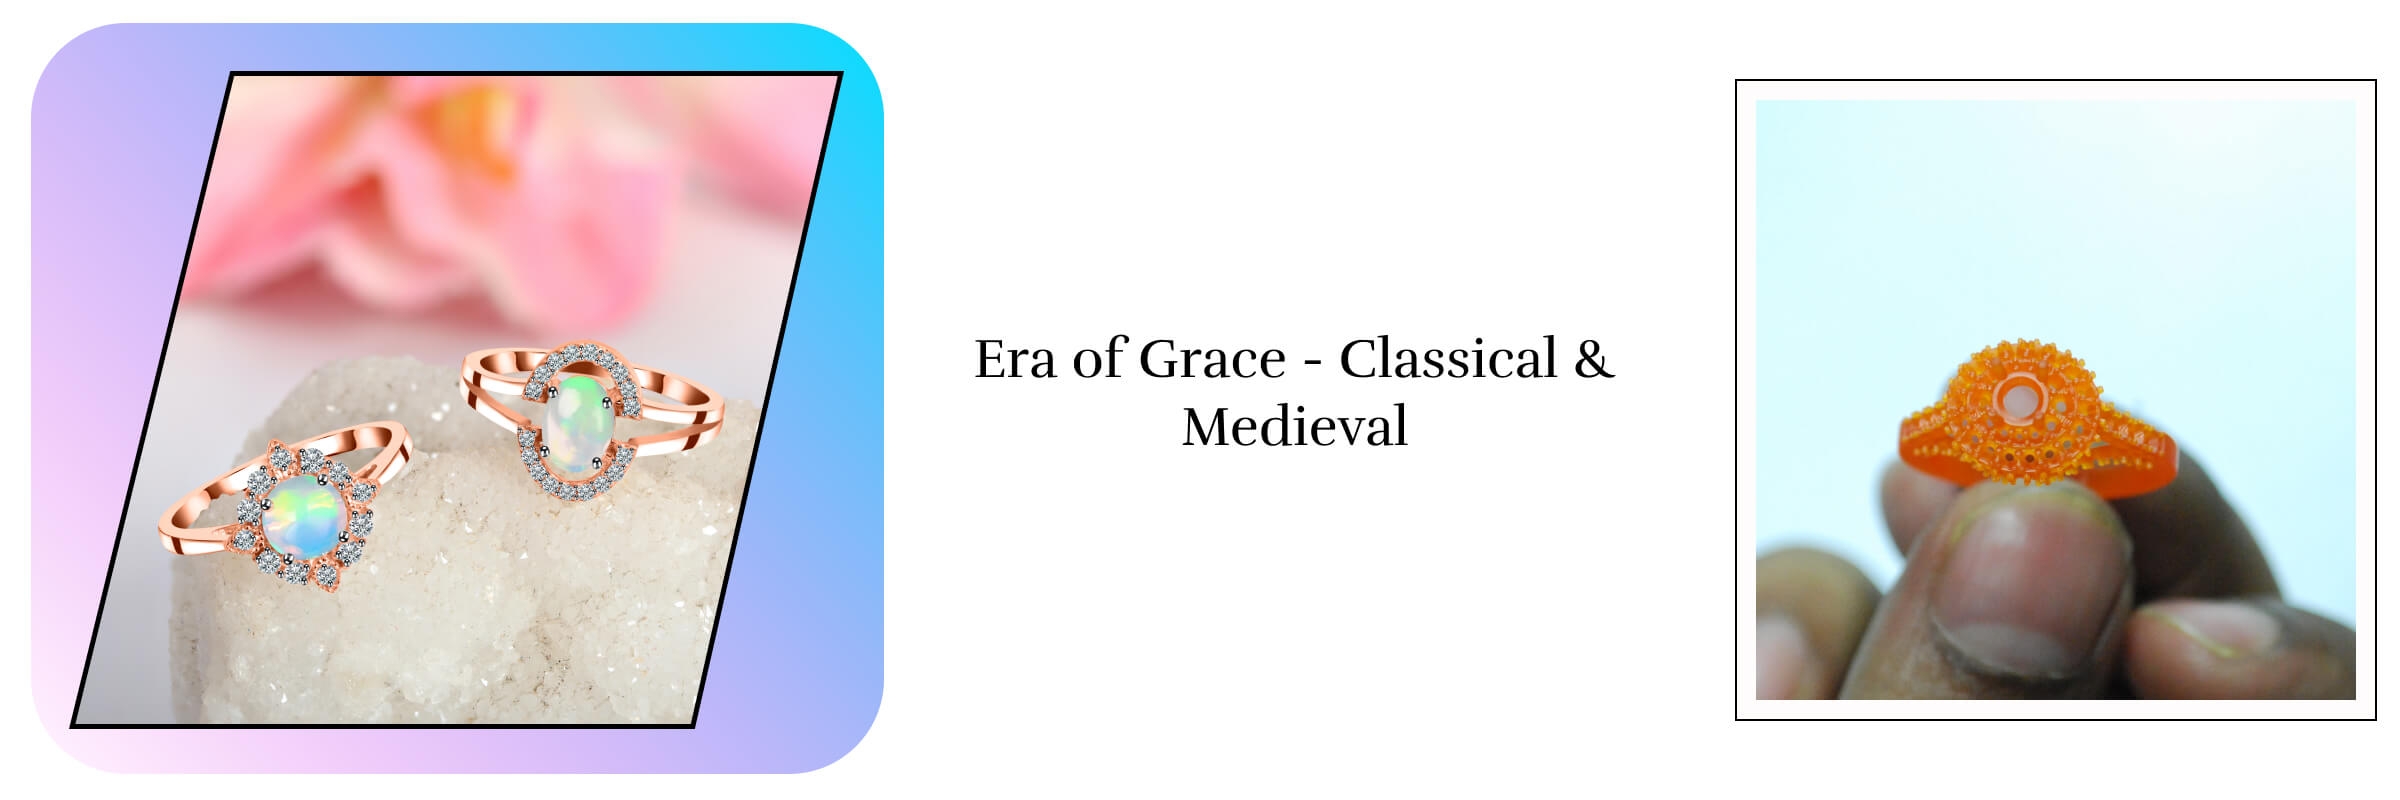 Classical and Medieval Periods